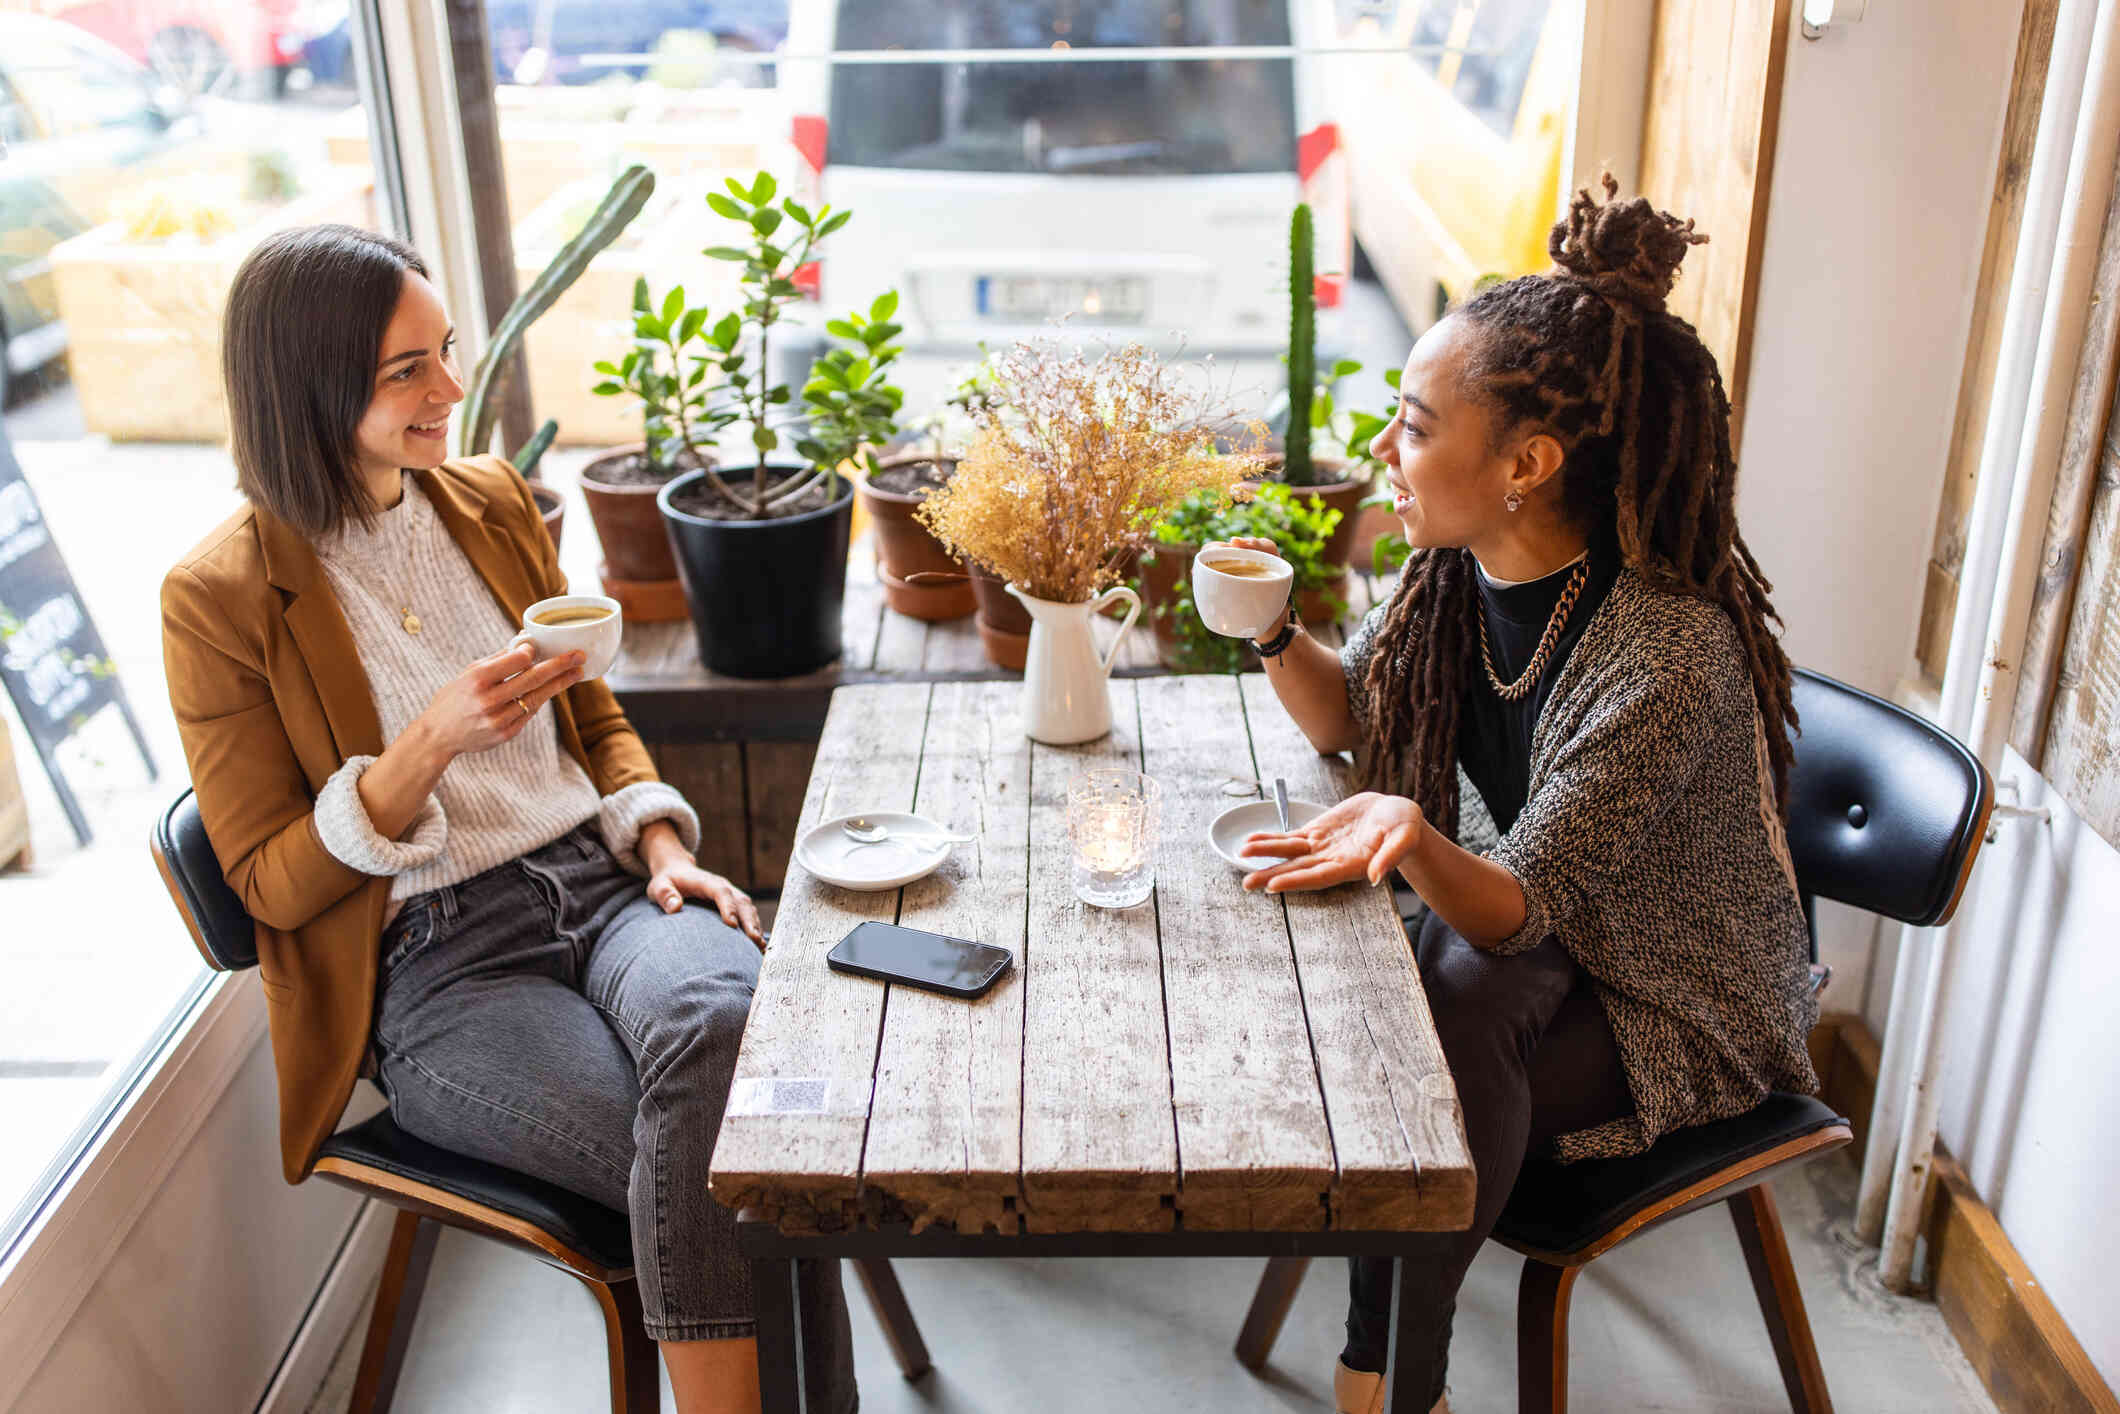 Two woman sit across from each other at a table in coffee shop and chat while drinking their coffee.